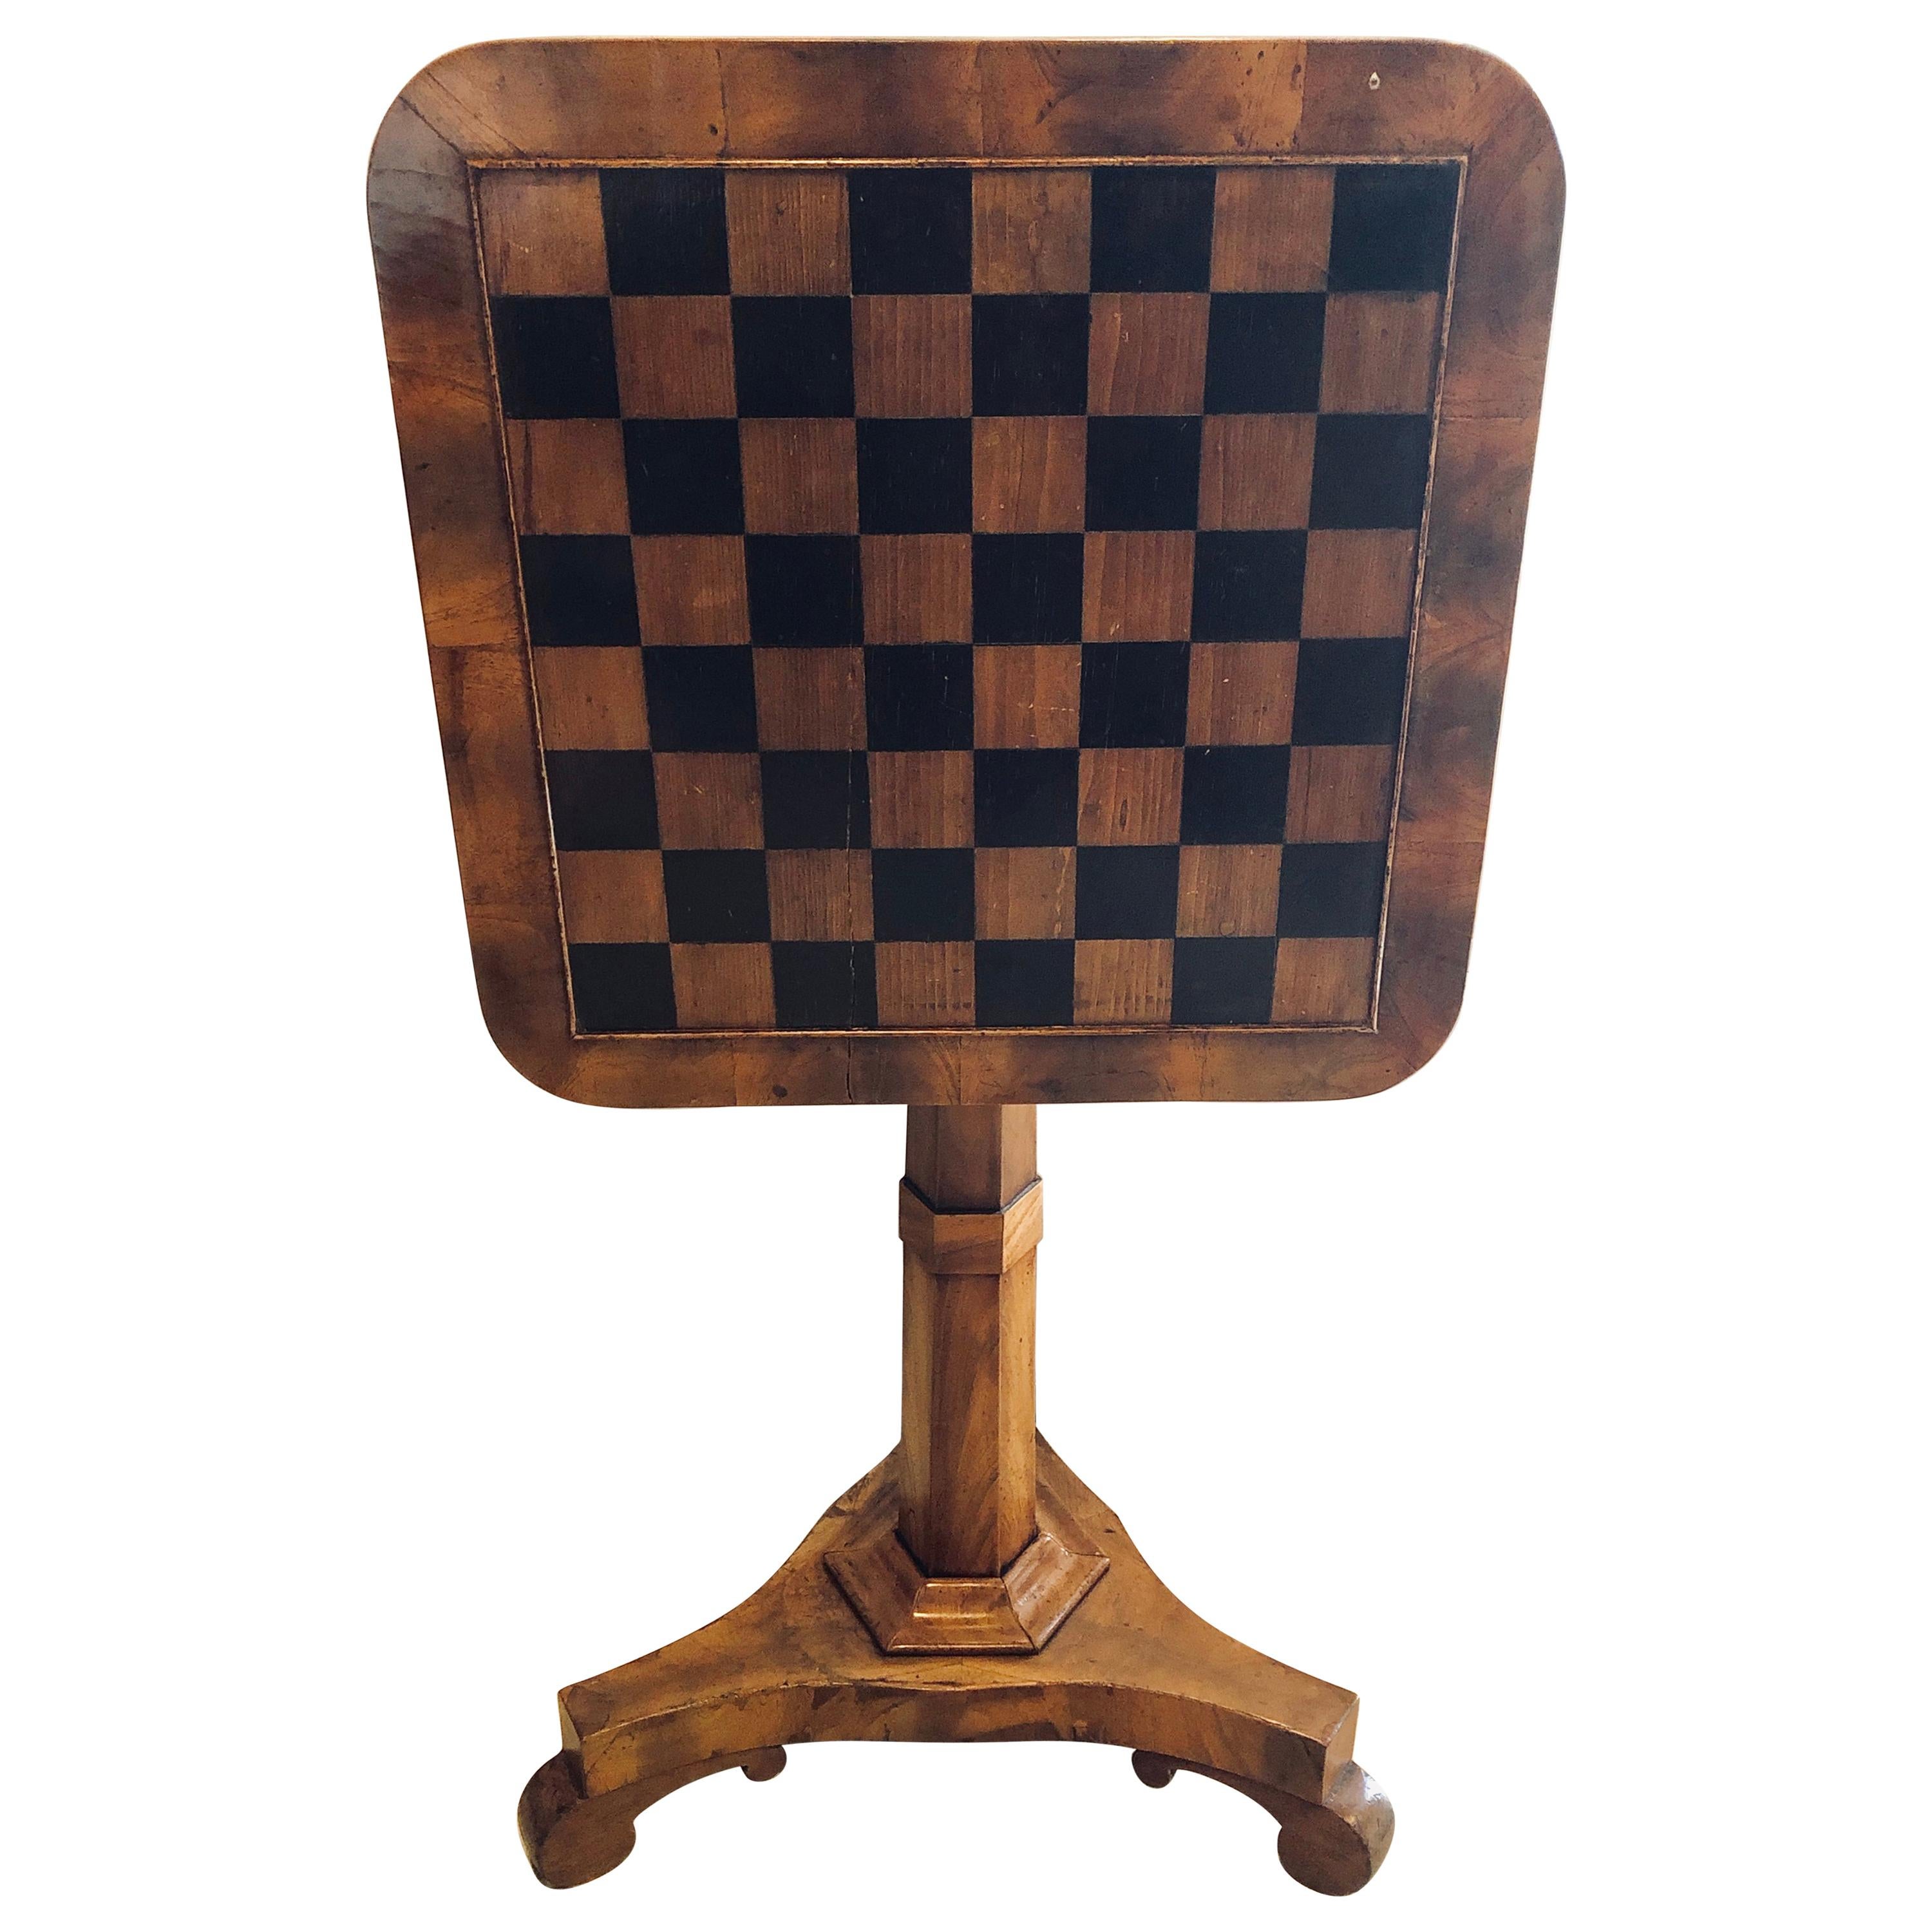 19th Century English Tilt-Top Game Checkerboard or Card Table